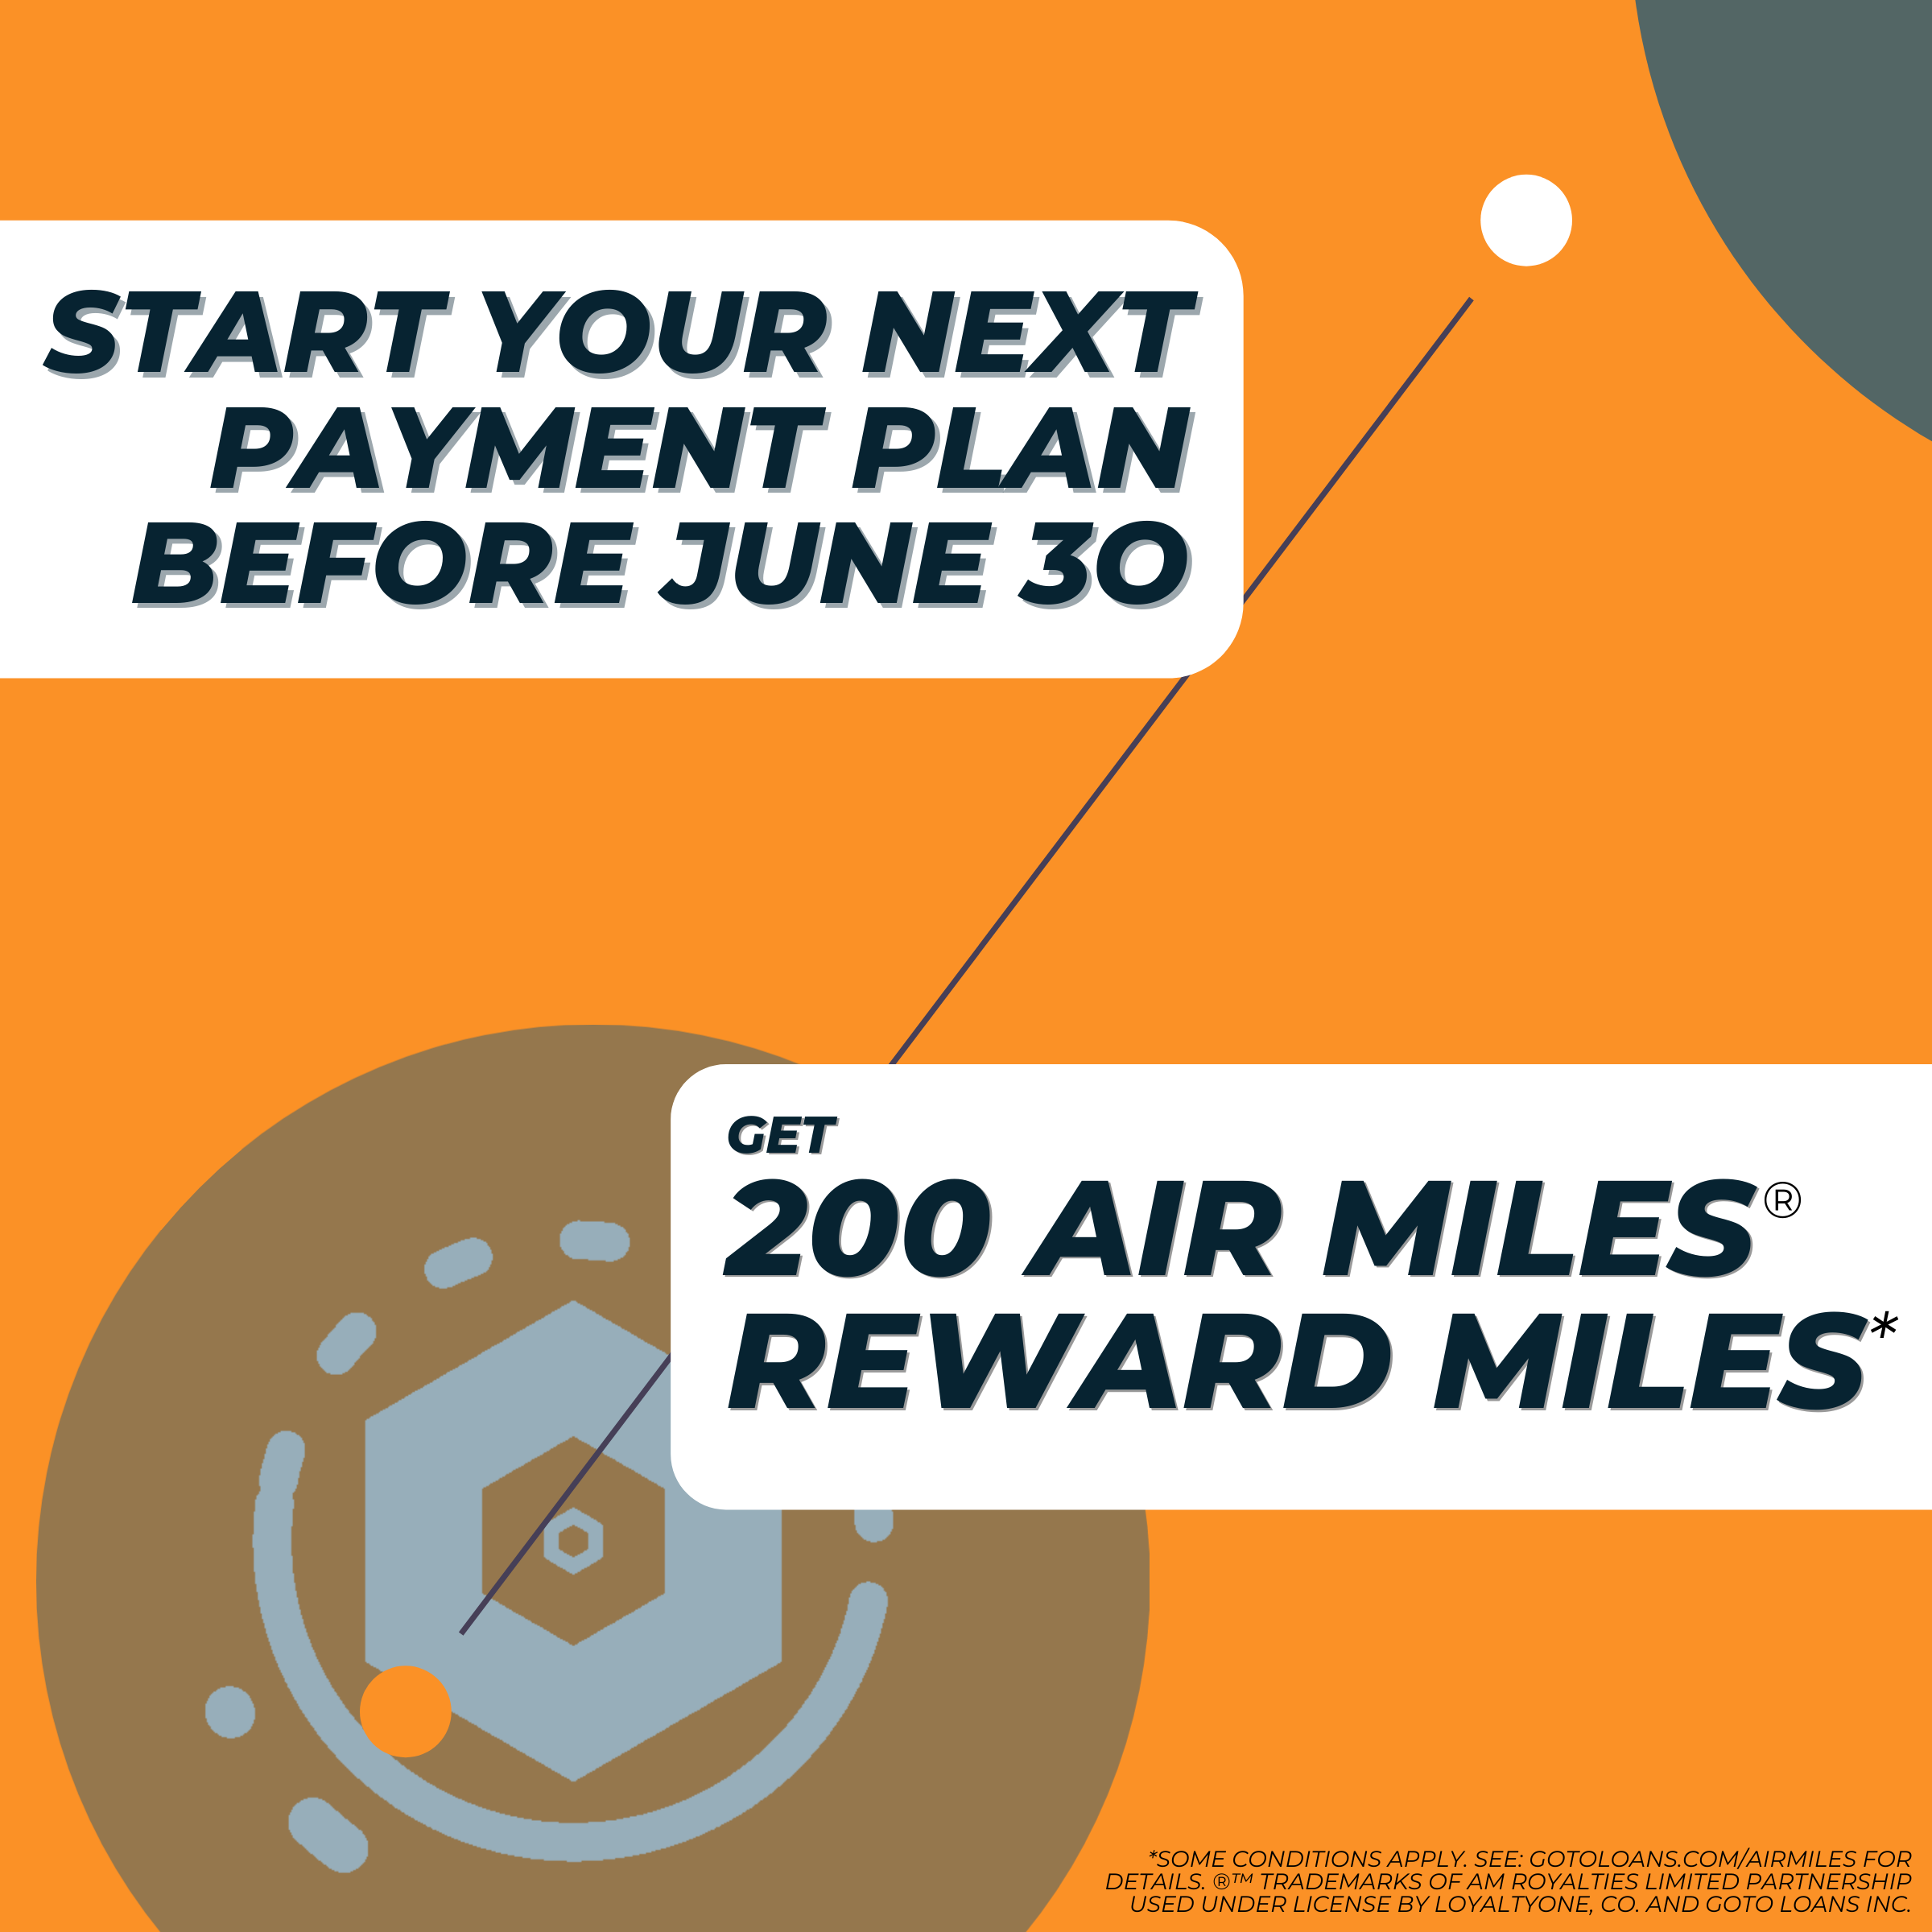 Get double the miles